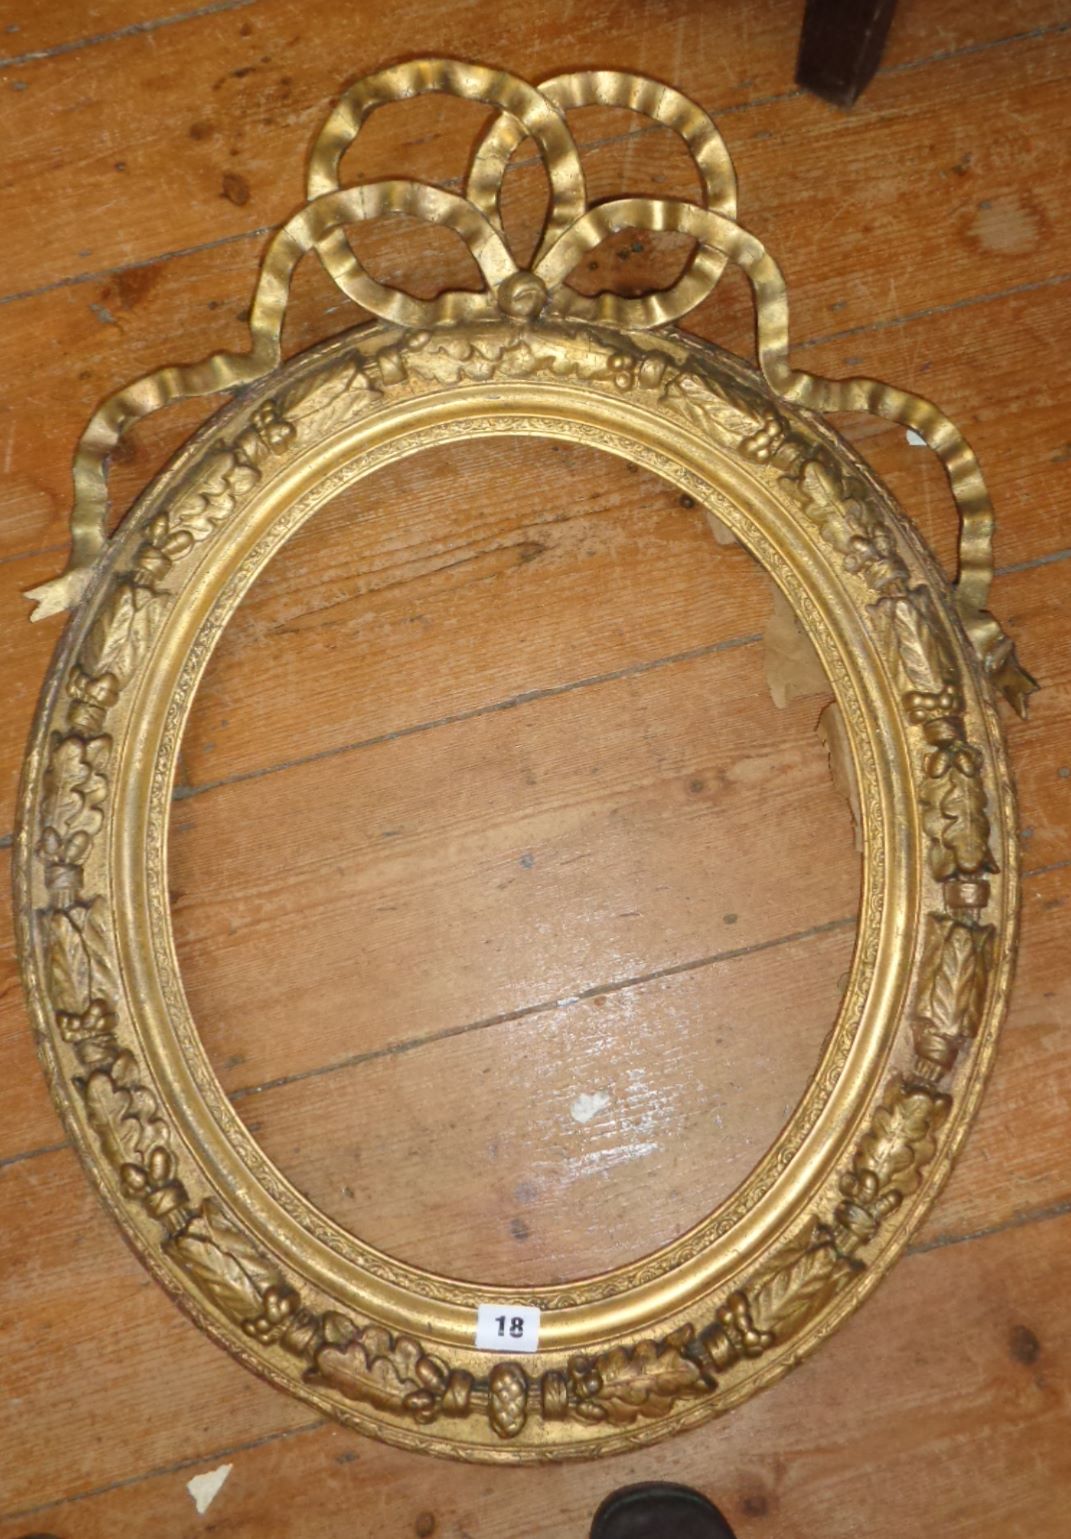 19th c. oval giltwood and gesso frame with entwined ribbon with a convex glass portrait of a lady